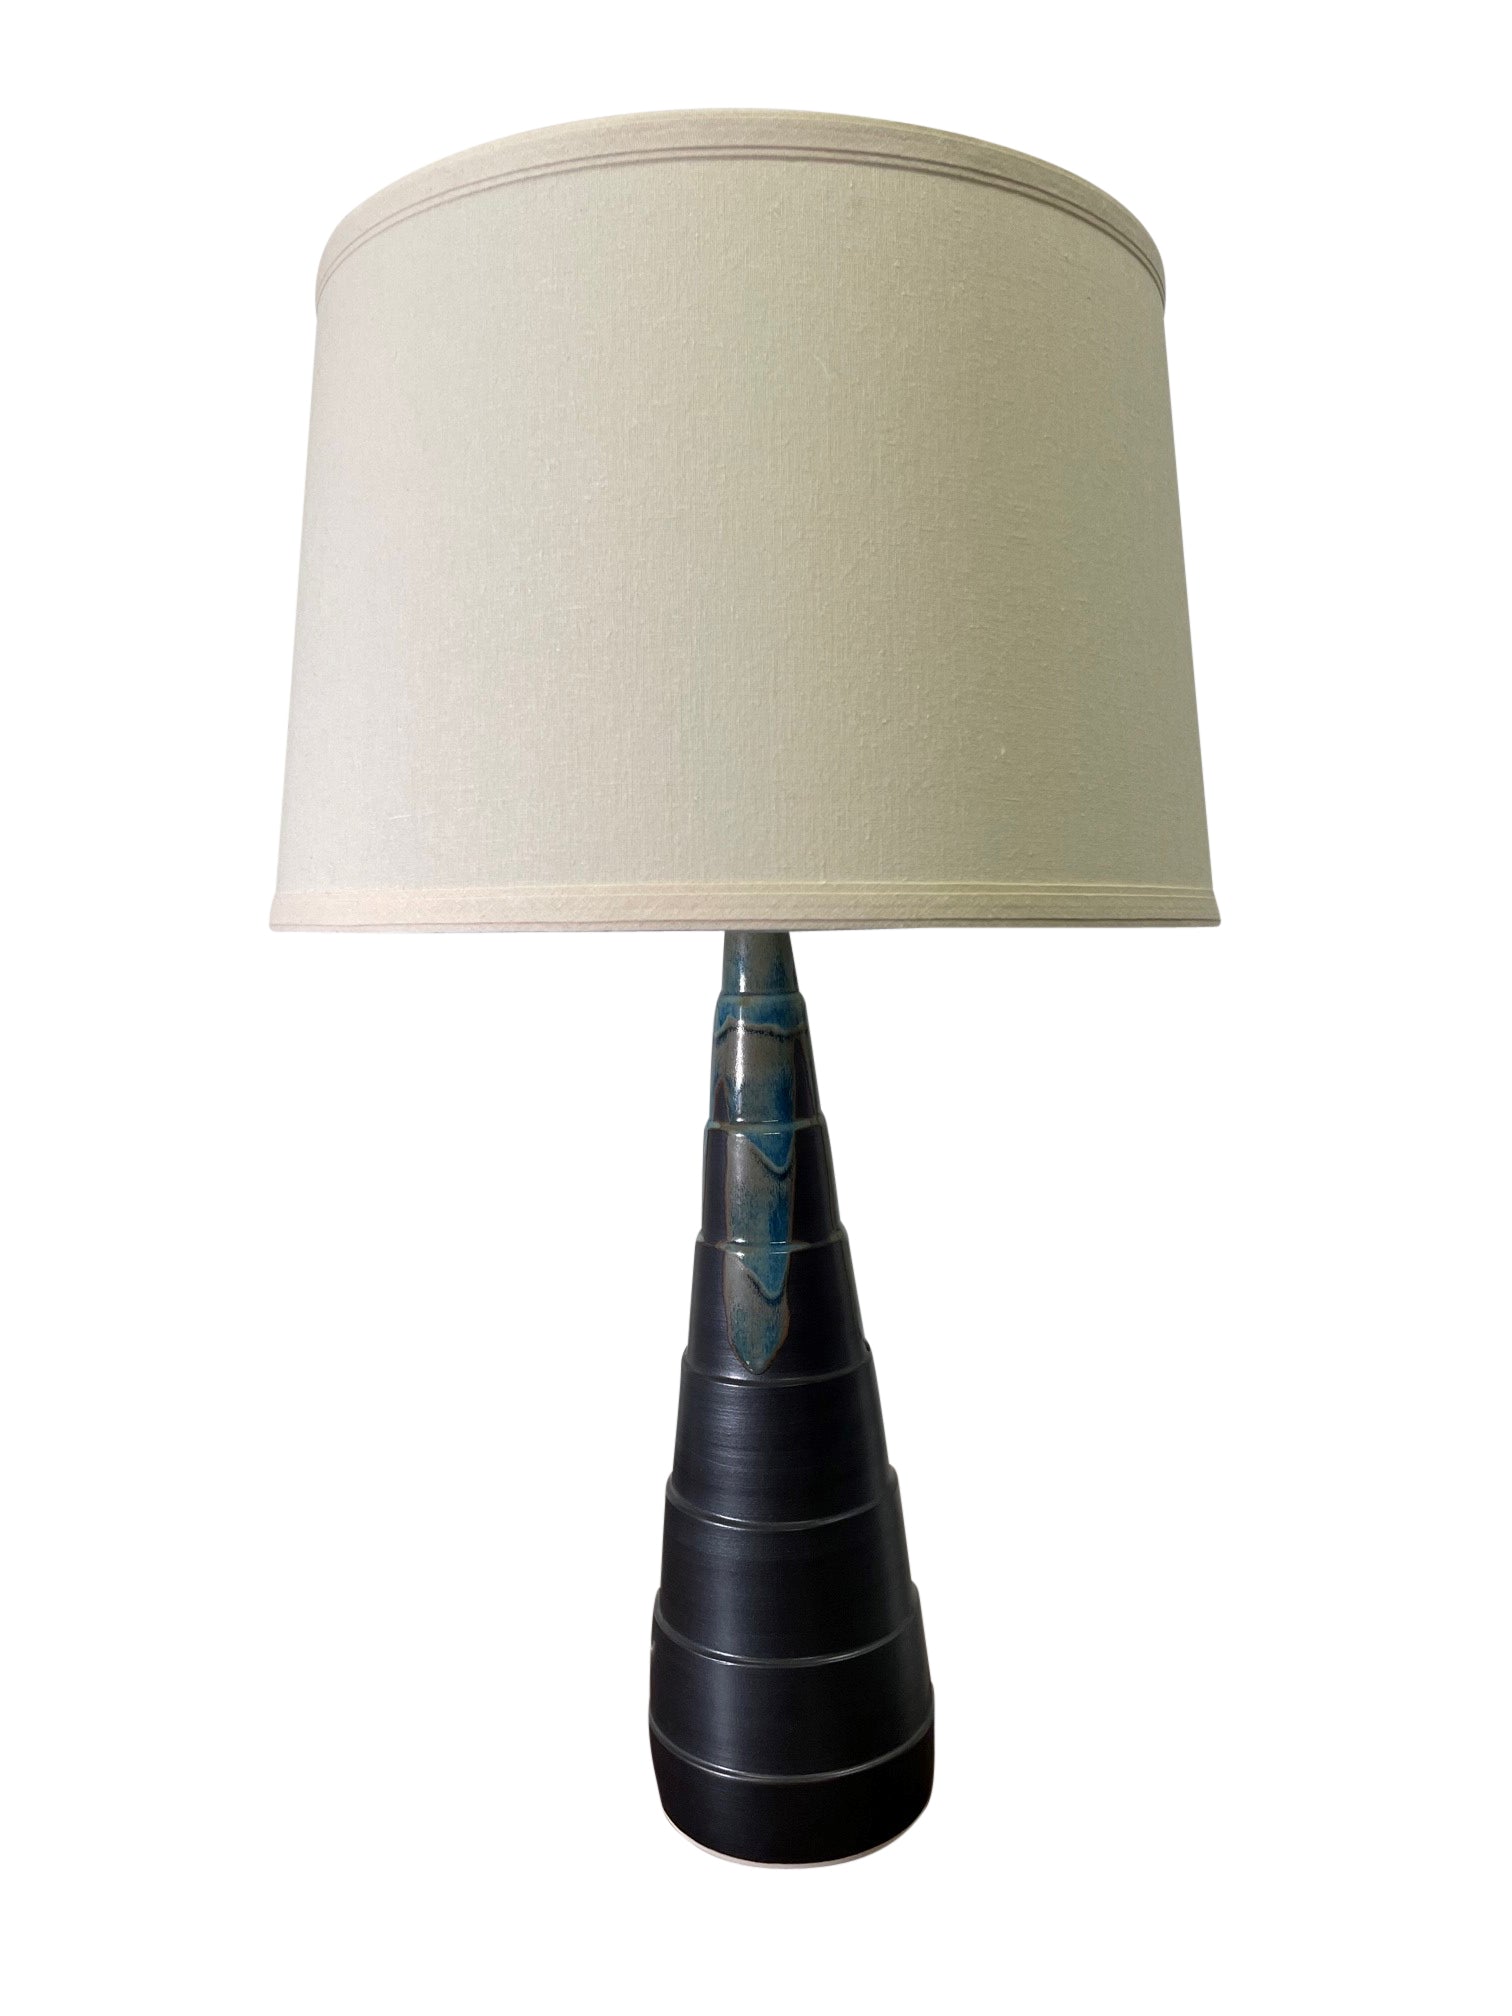 House of Troy Scatchard 26.5" Stoneware Accent Lamp in Kaleidoscope GS826-KS